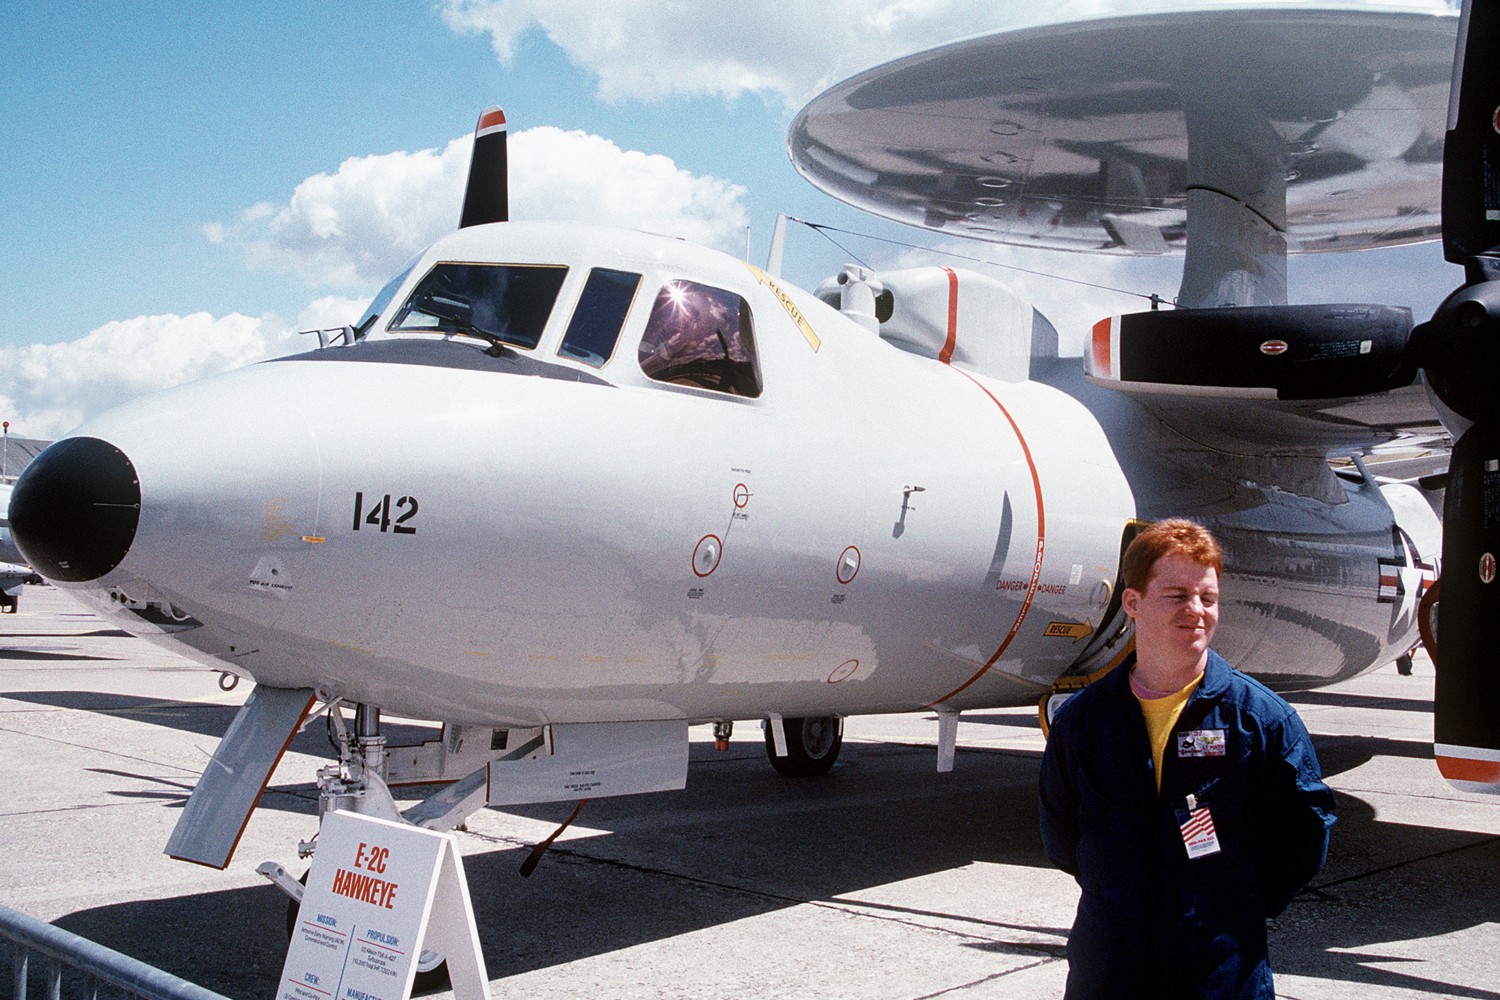 vaw-122 steeljaws carrier airborne early warning squadron e-2c hawkeye us navy paris air show le bourget 1991 02